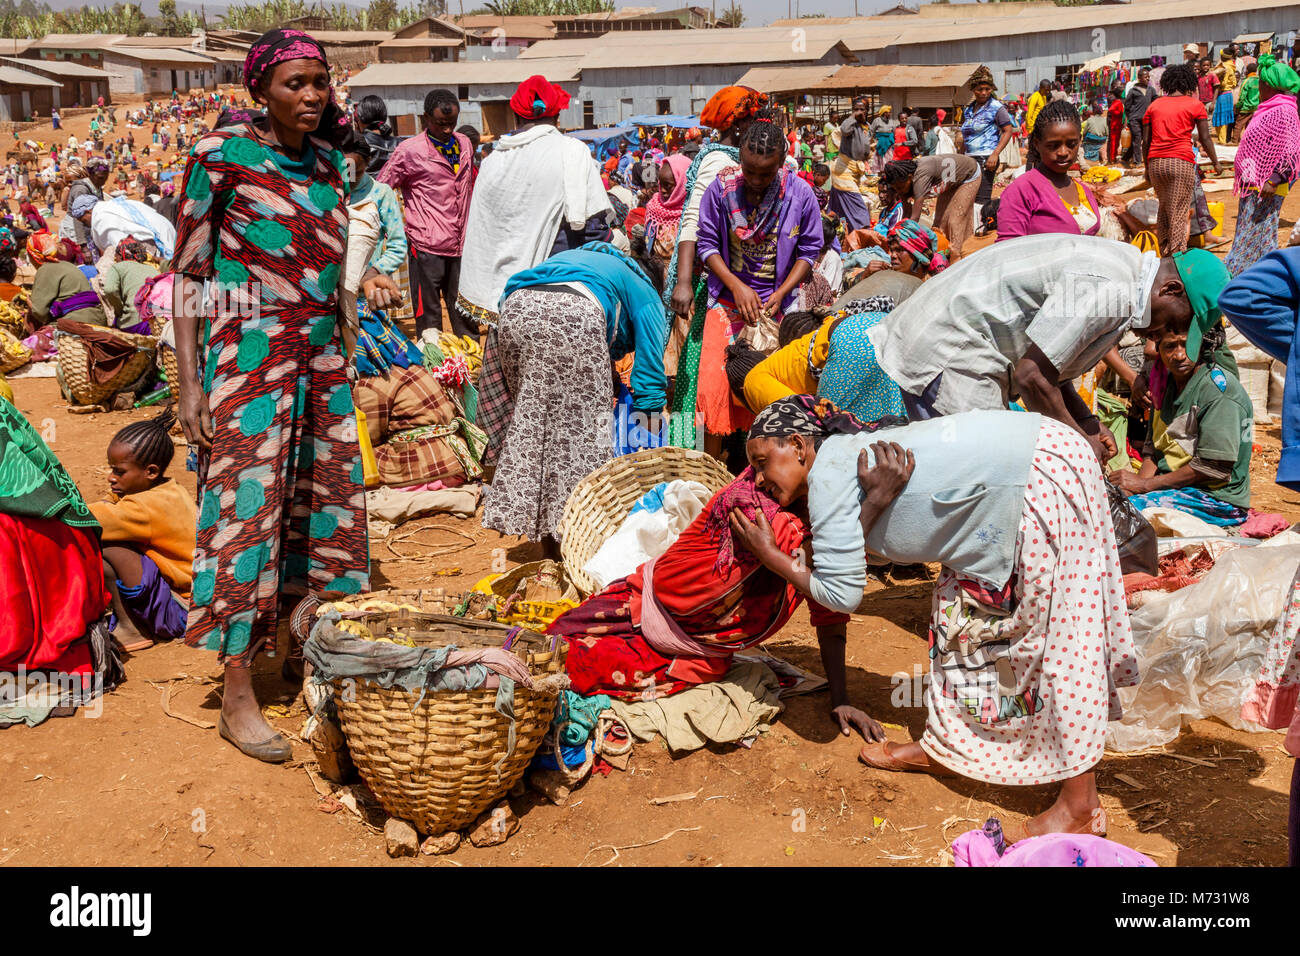 Local Women Greeting Each Other At The Famous Saturday Market In The Dorze Village Of Chencha, High Up In The Guge Mountains, Gamo Gofa Zone, Ethiopia Stock Photo